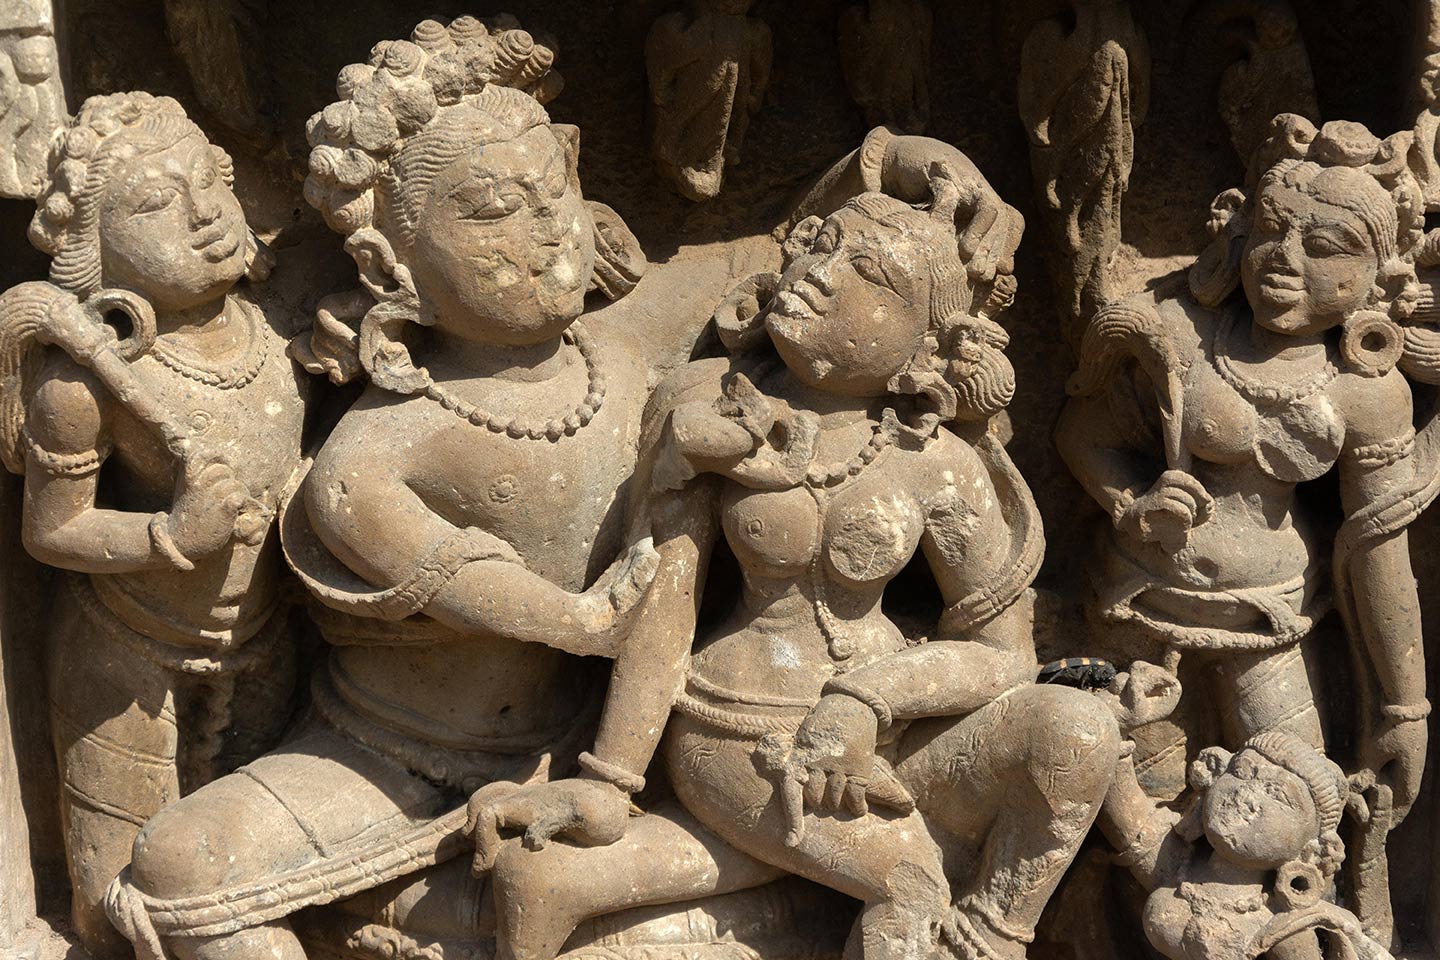 The man is admiring the beauty of the woman, placing his left hand on her coiffure and inspecting her face with his left hand (missing). Chauri dharini (fly whisk bearers) stand on either side of the couple, looking towards them. A small female figure features at the right bottom, likely an attendant or servant.